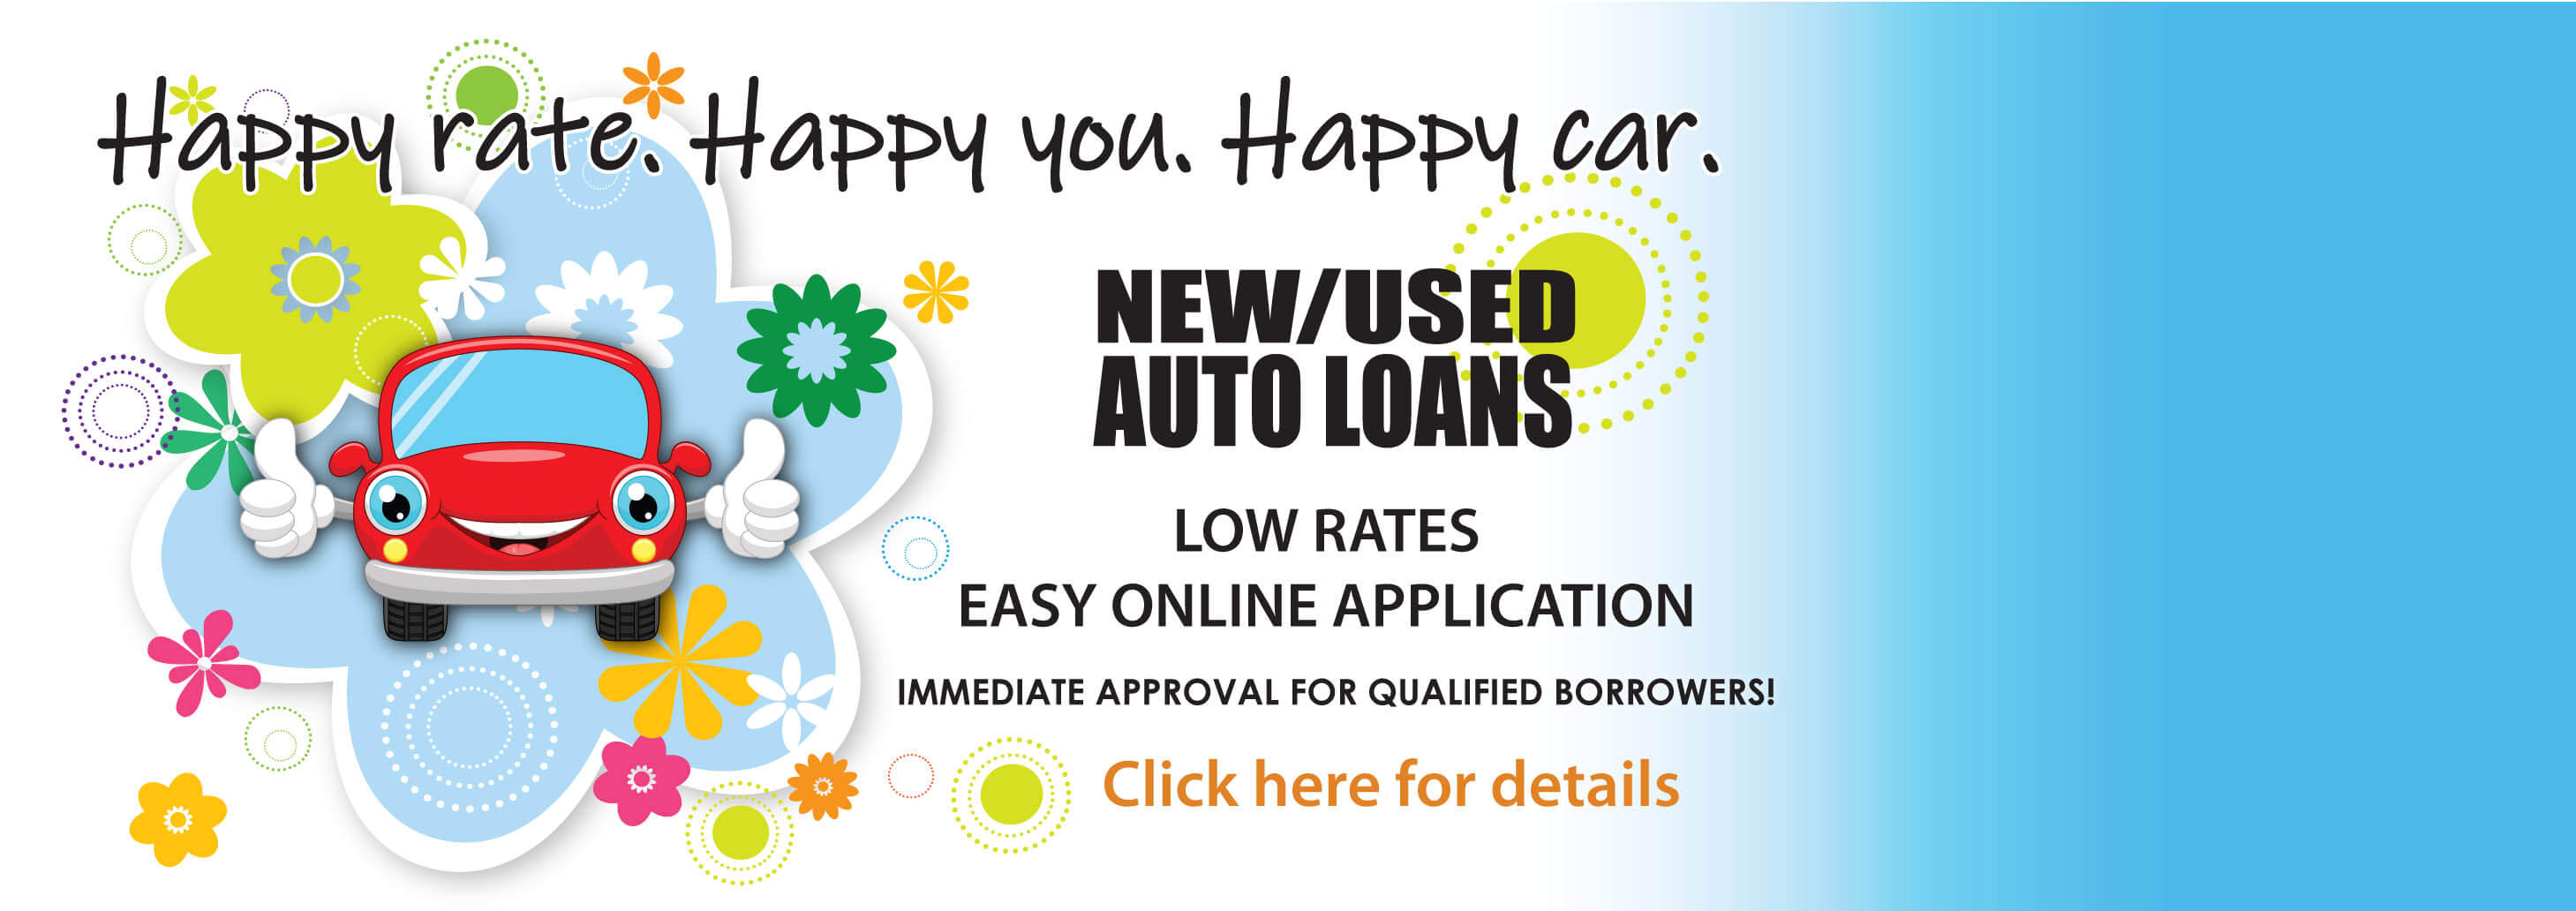 New/Used Auto Loans